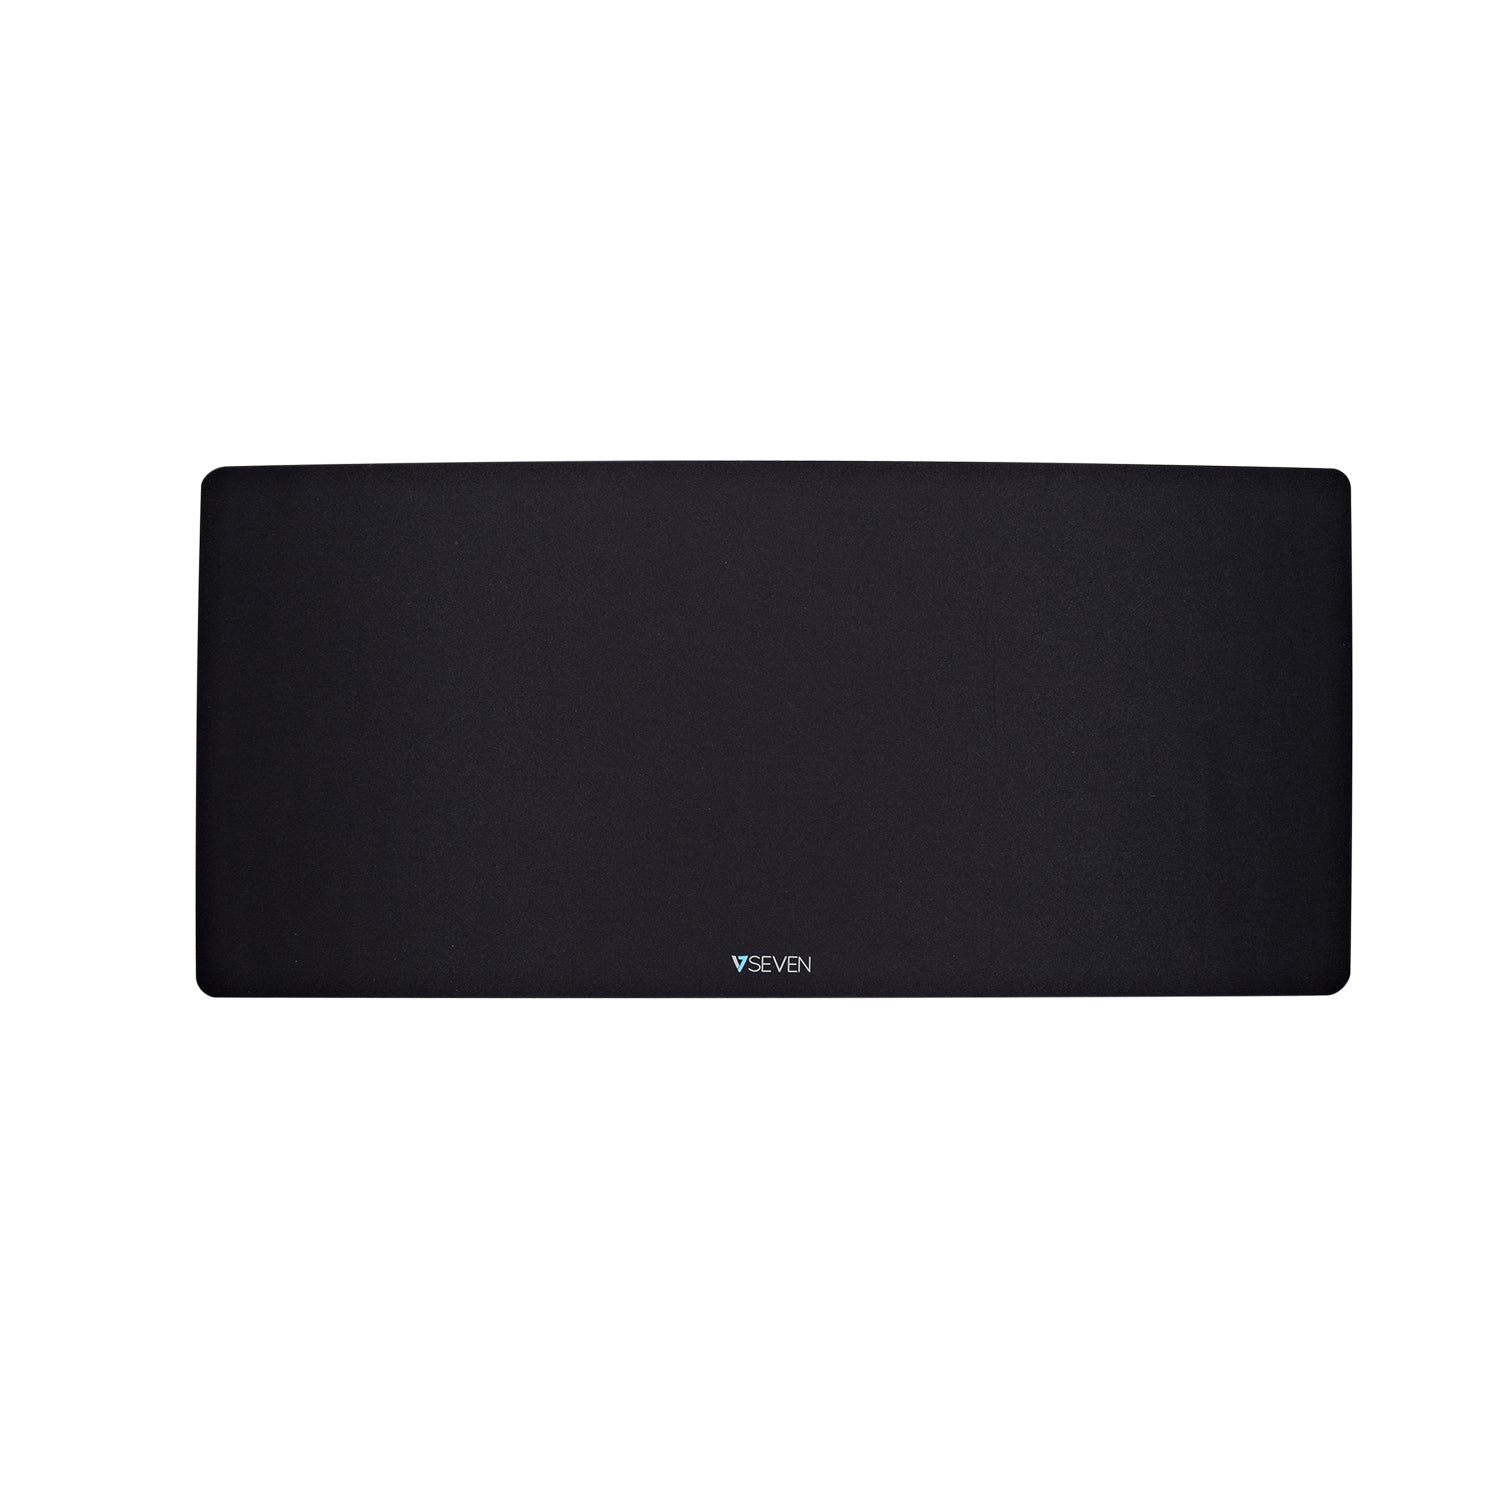 V7 MP04BLK XL Antimicrobial Desk Mat Mouse pad 90 x 42 x 3 cm (35.43 x 16.54 x 0.12 in)